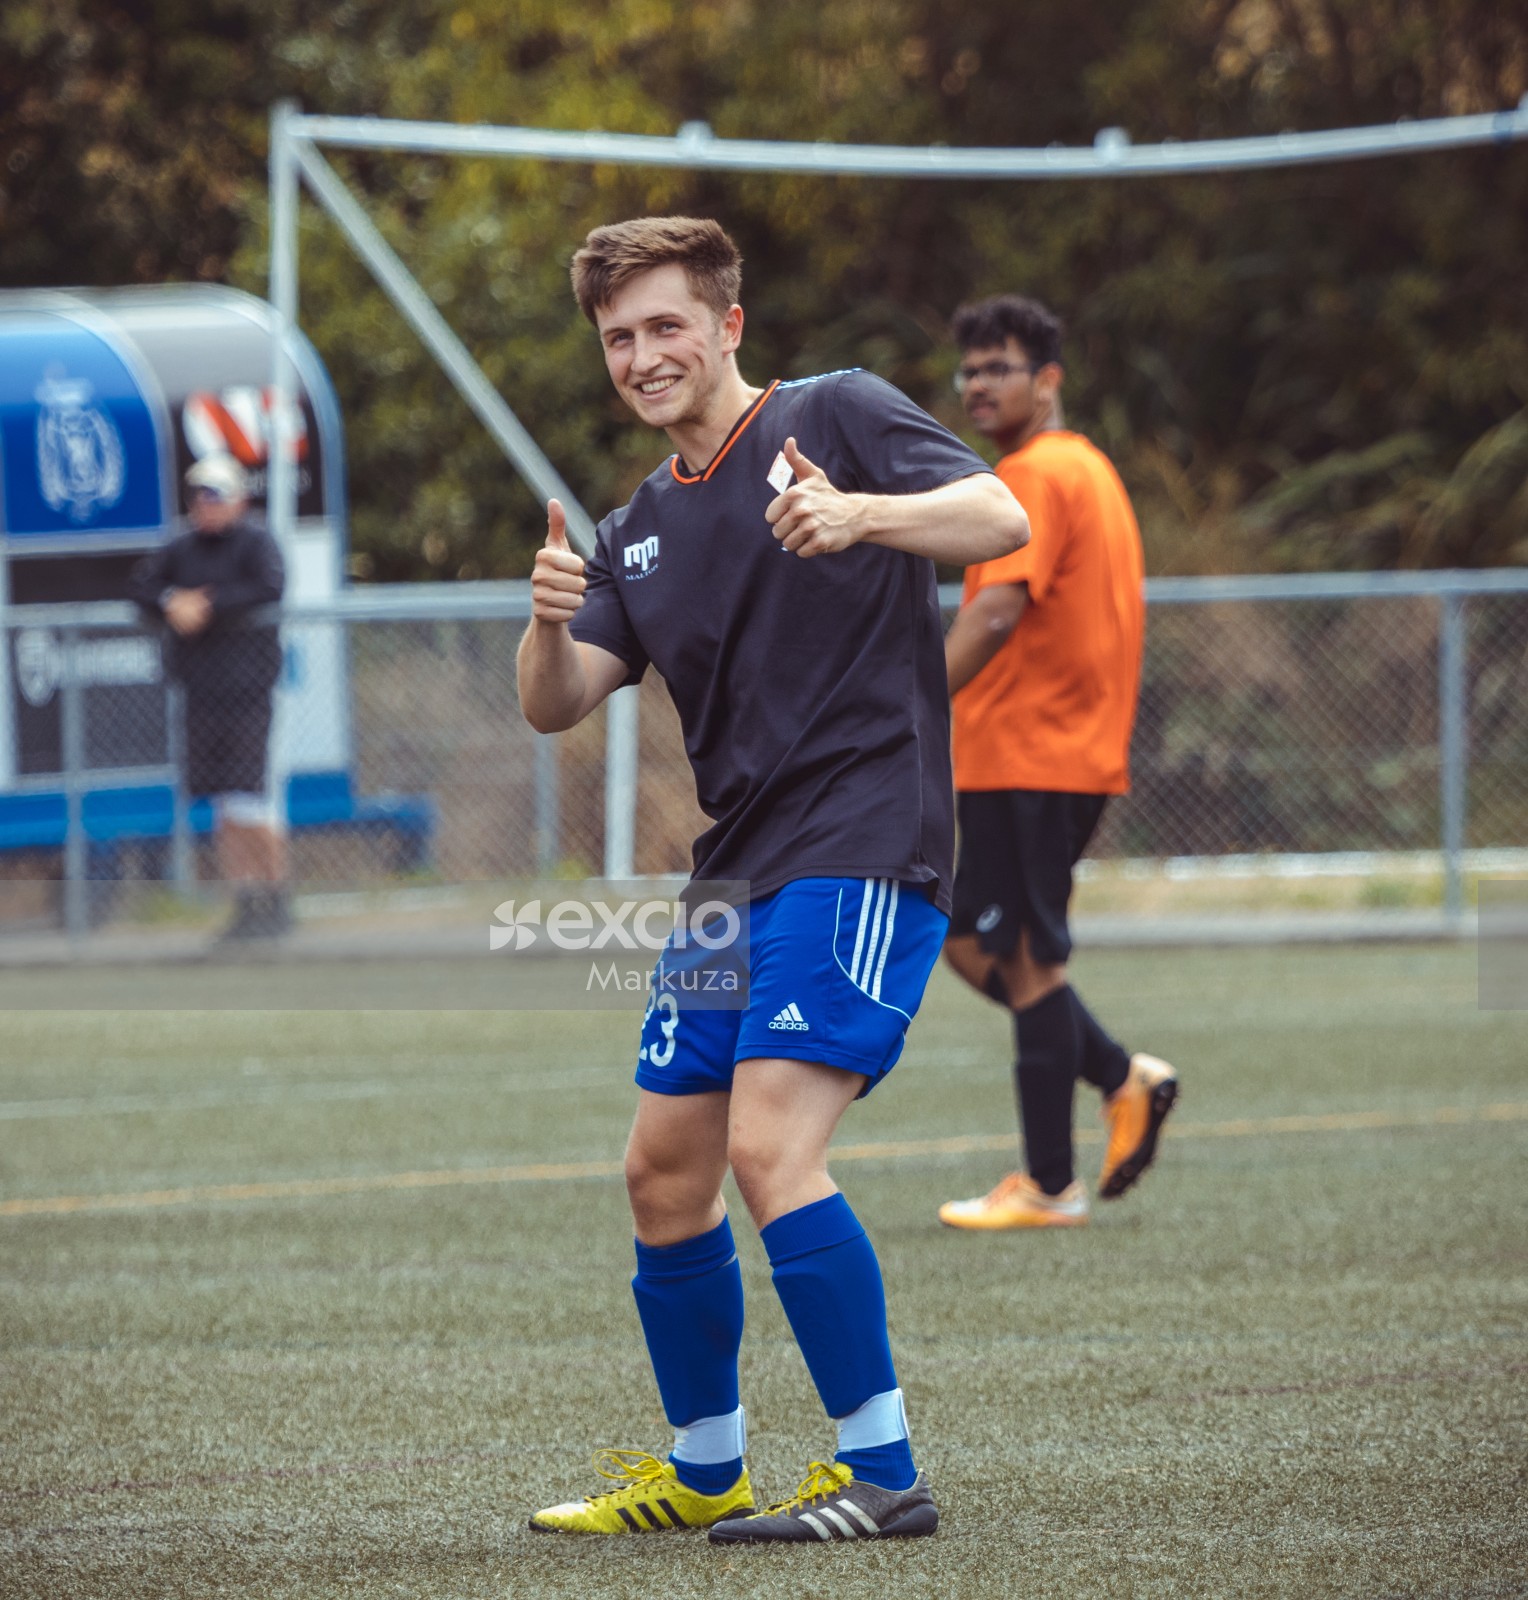 Handsome football player thumbs up pose - Sports Zone sunday league